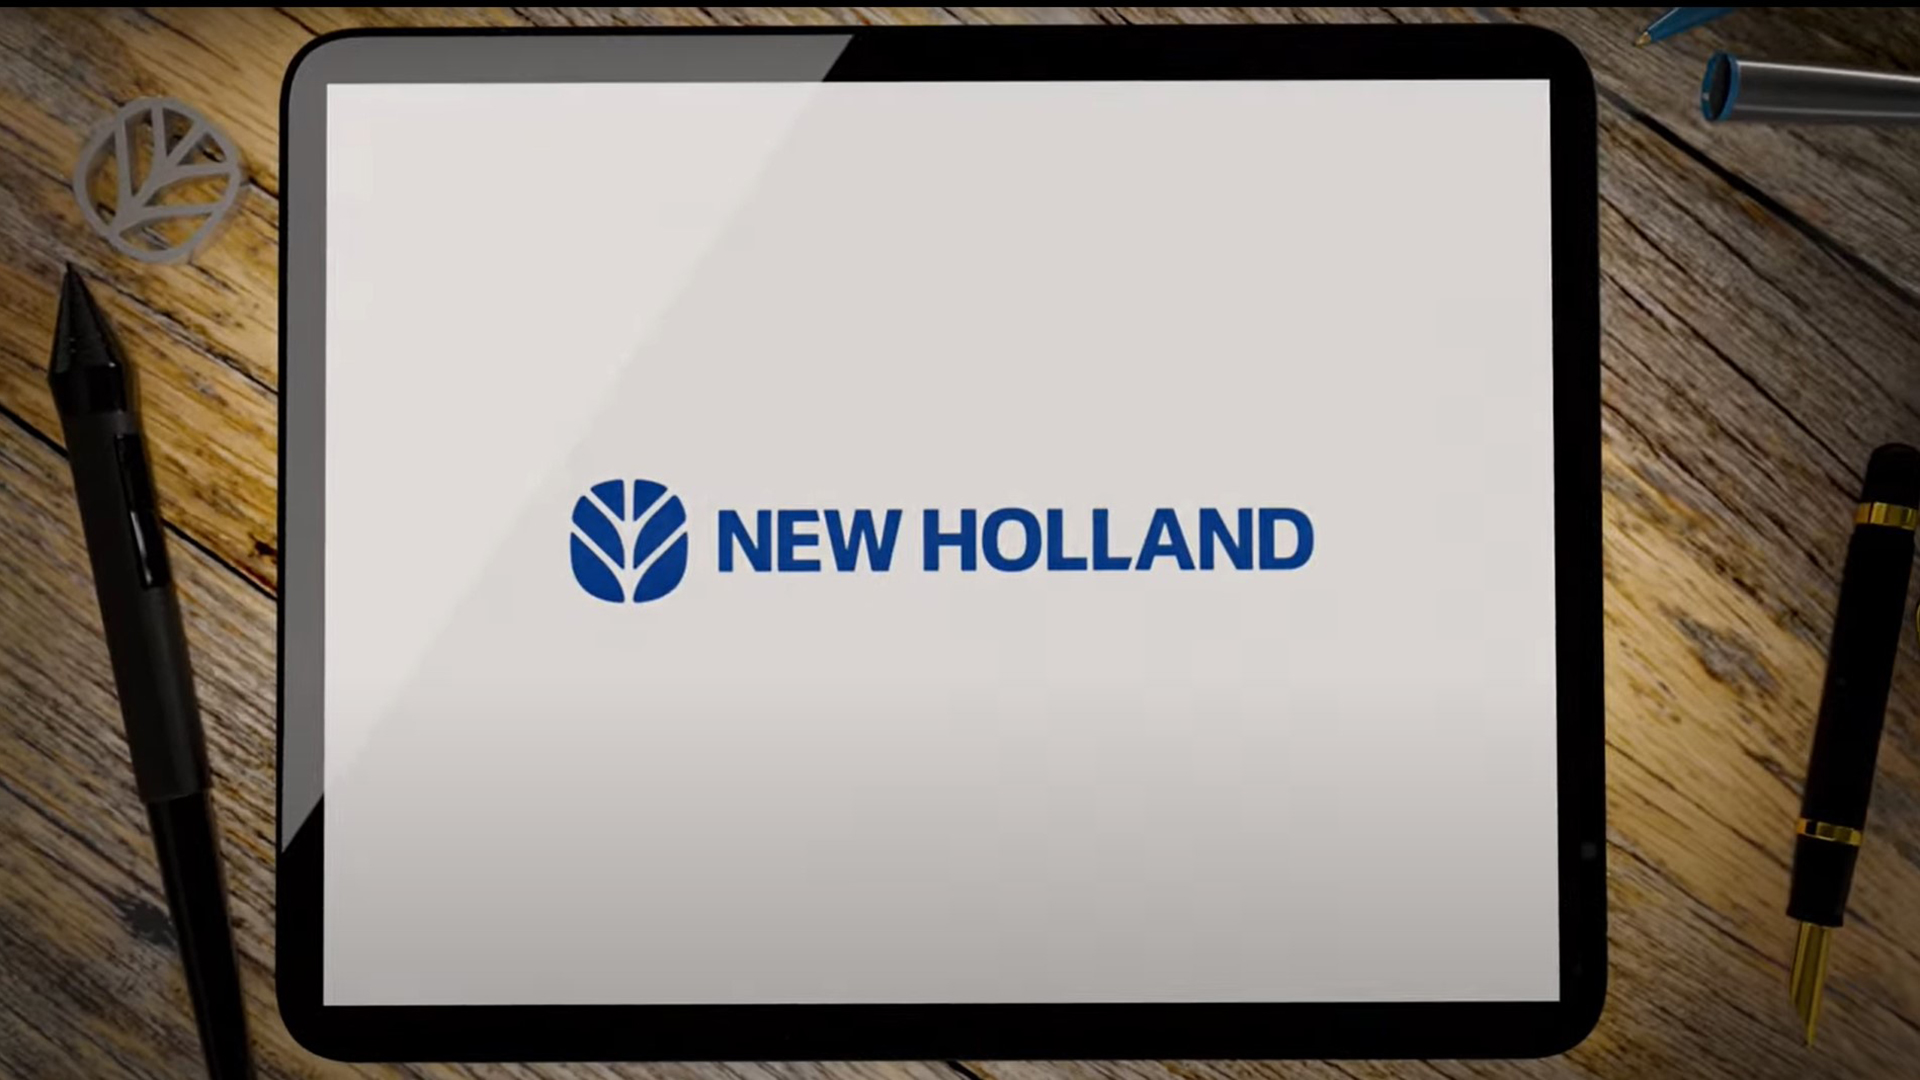 New Holland of the future: our identity evolves